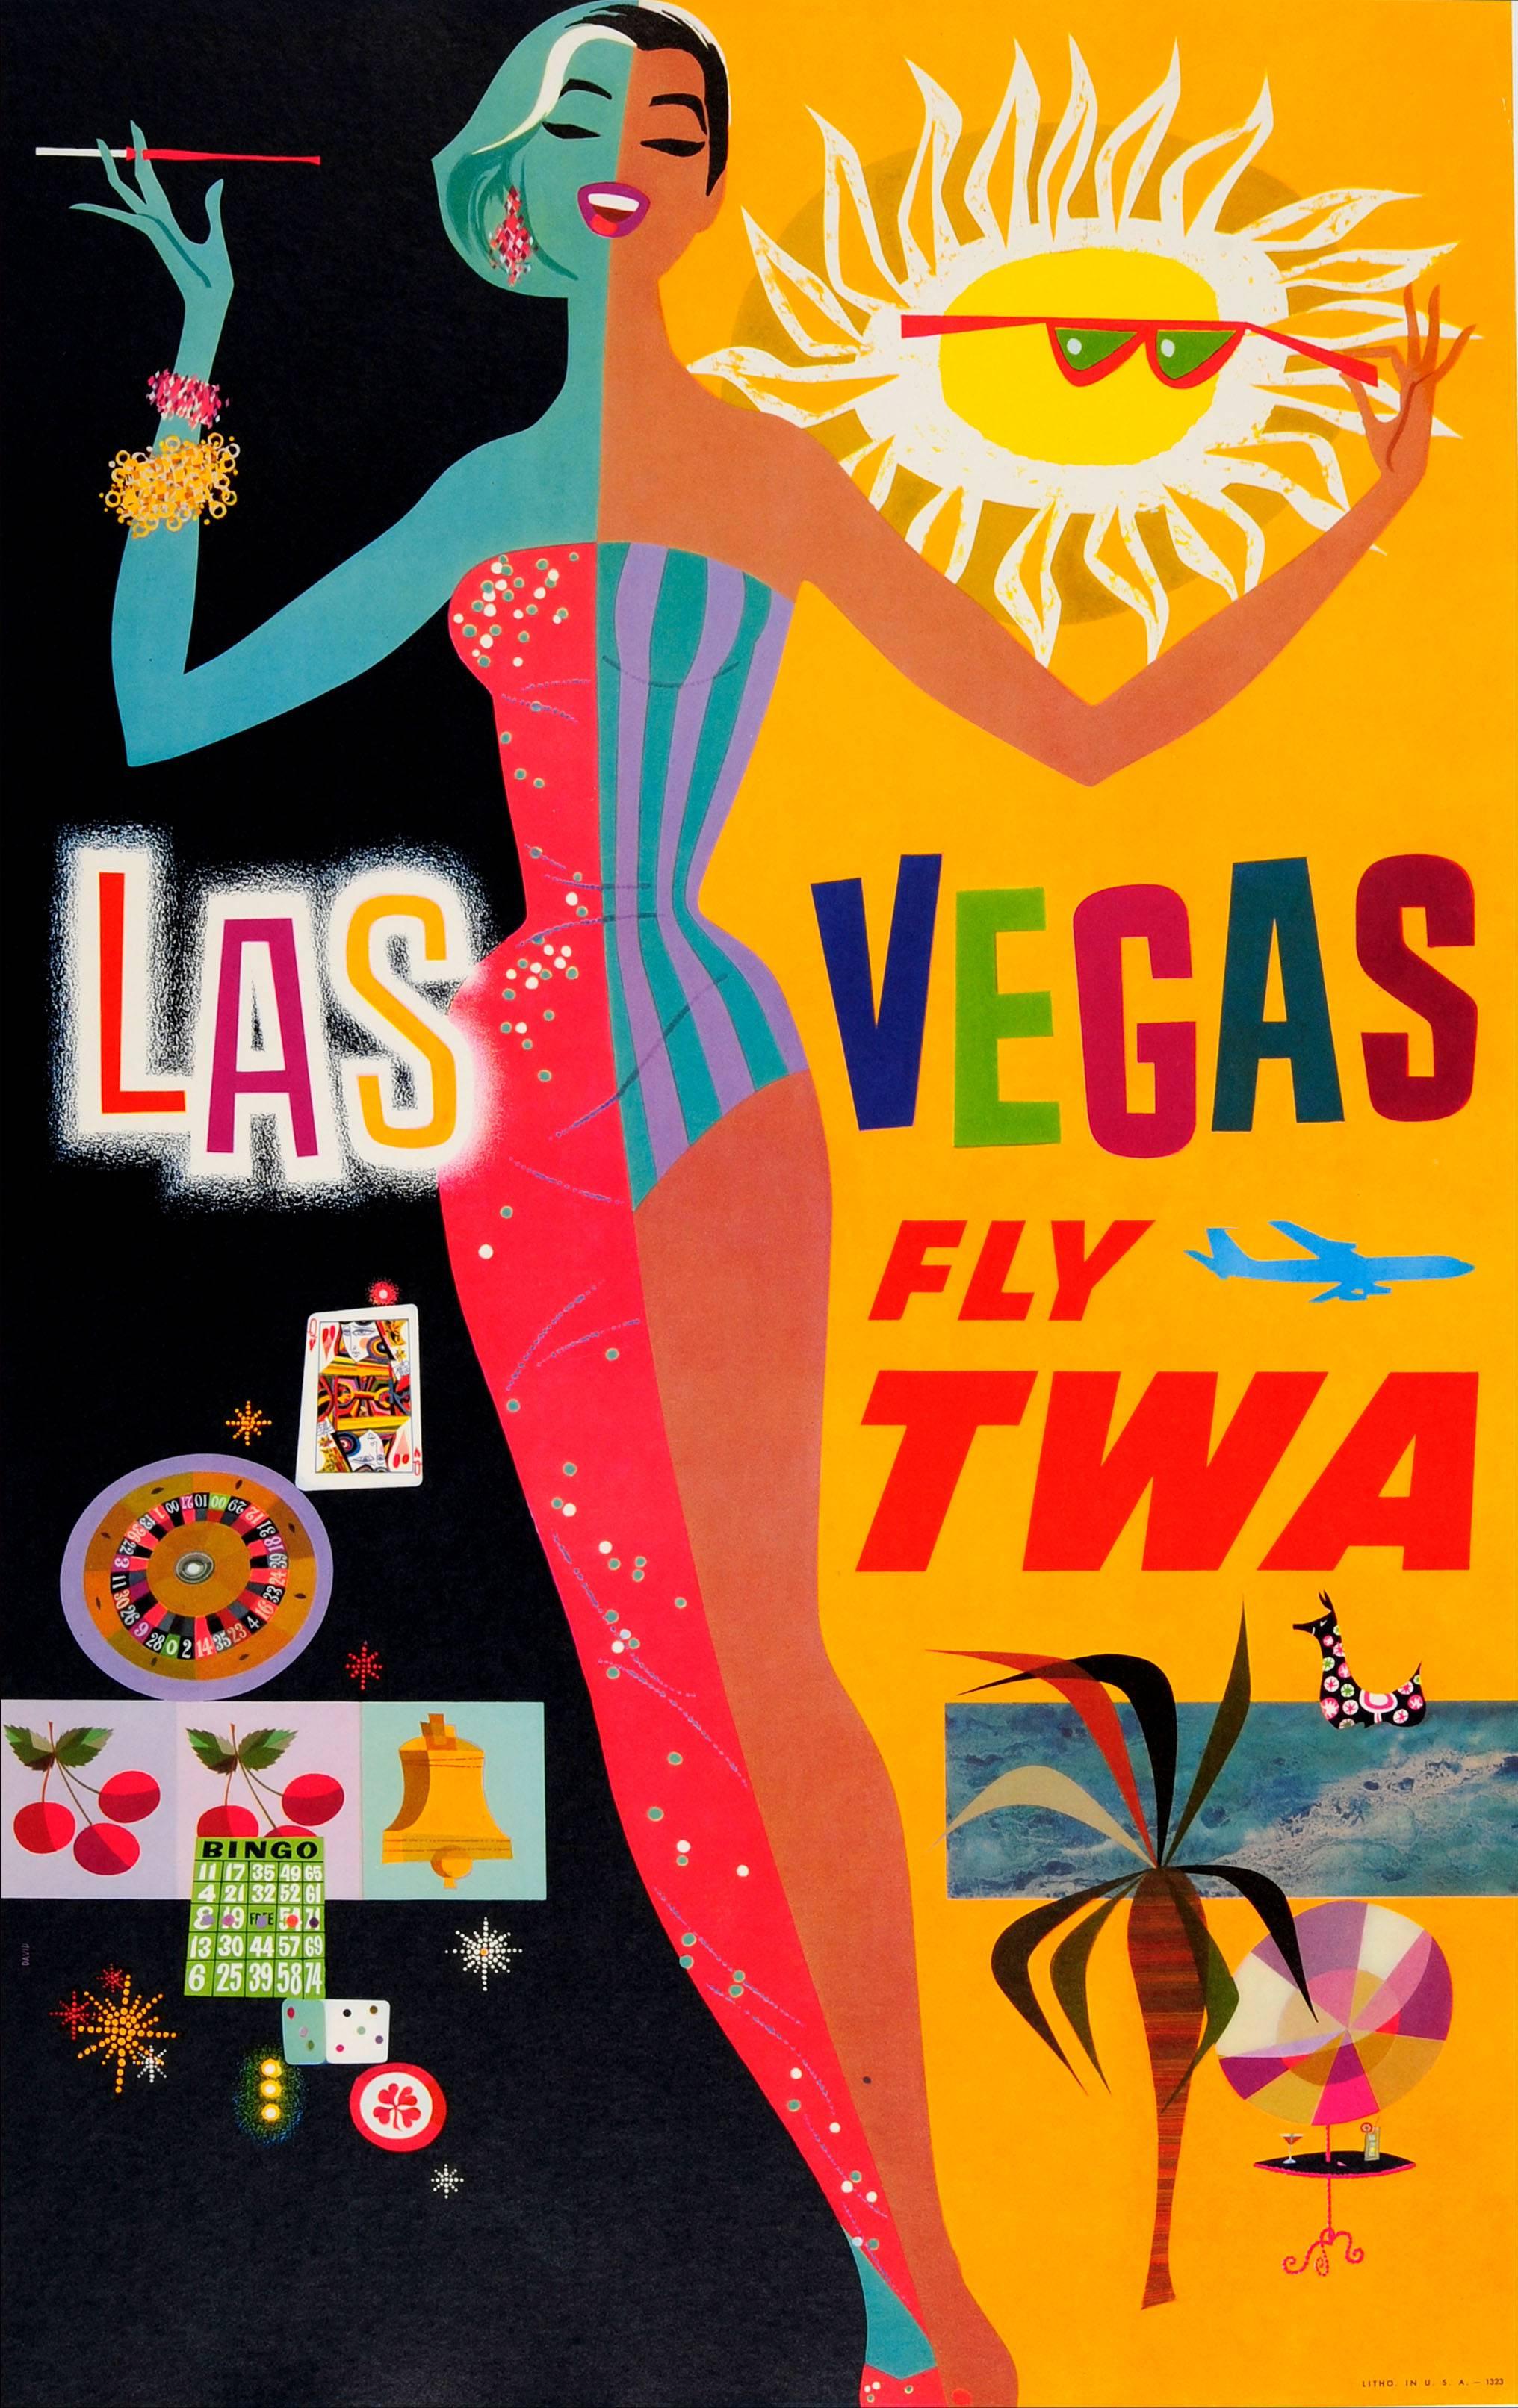 Original vintage travel poster advertising Las Vegas by TWA, Trans World Airlines. Colourful image featuring an elegant lady enjoying Las Vegas during the day and night, her right half wearing a sparkly red evening dress with her right hand holding